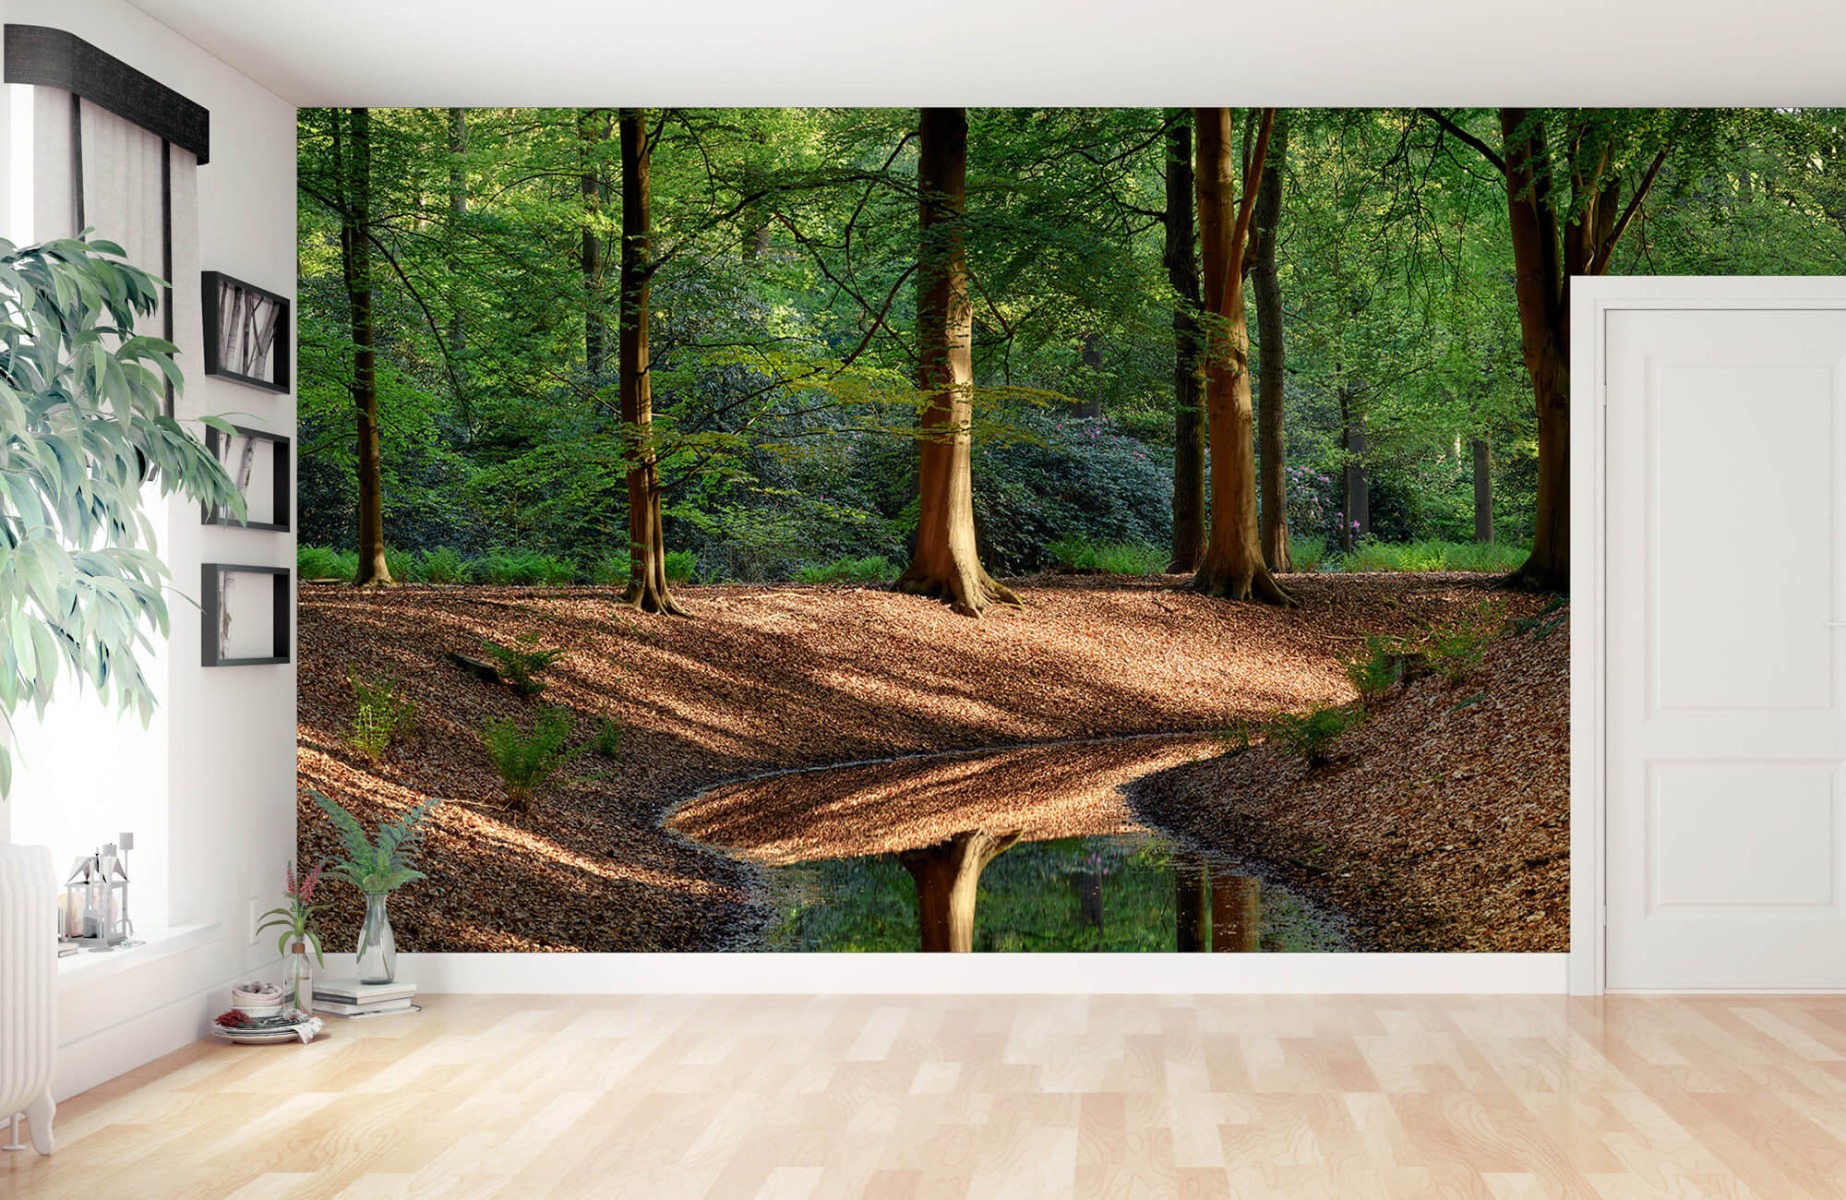 Forest wallpaper - Brooklet in the forest  - Bedroom 12